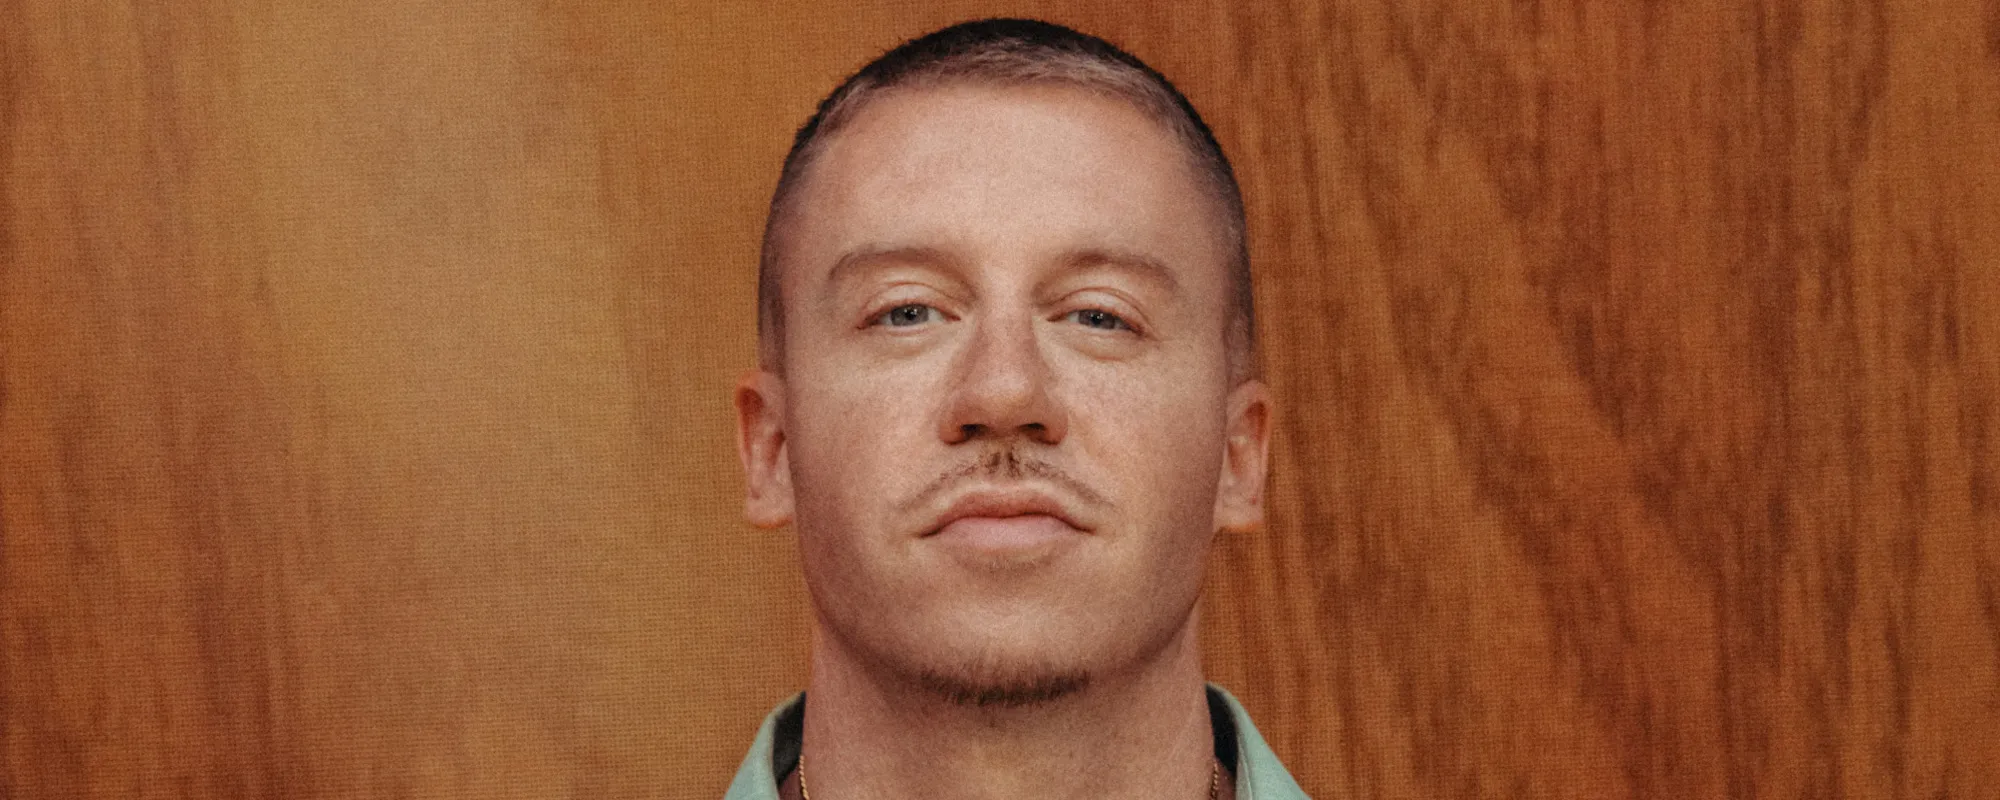 Macklemore Opens Up About Addiction, Premieres Video for Sobriety-Inspired New Song